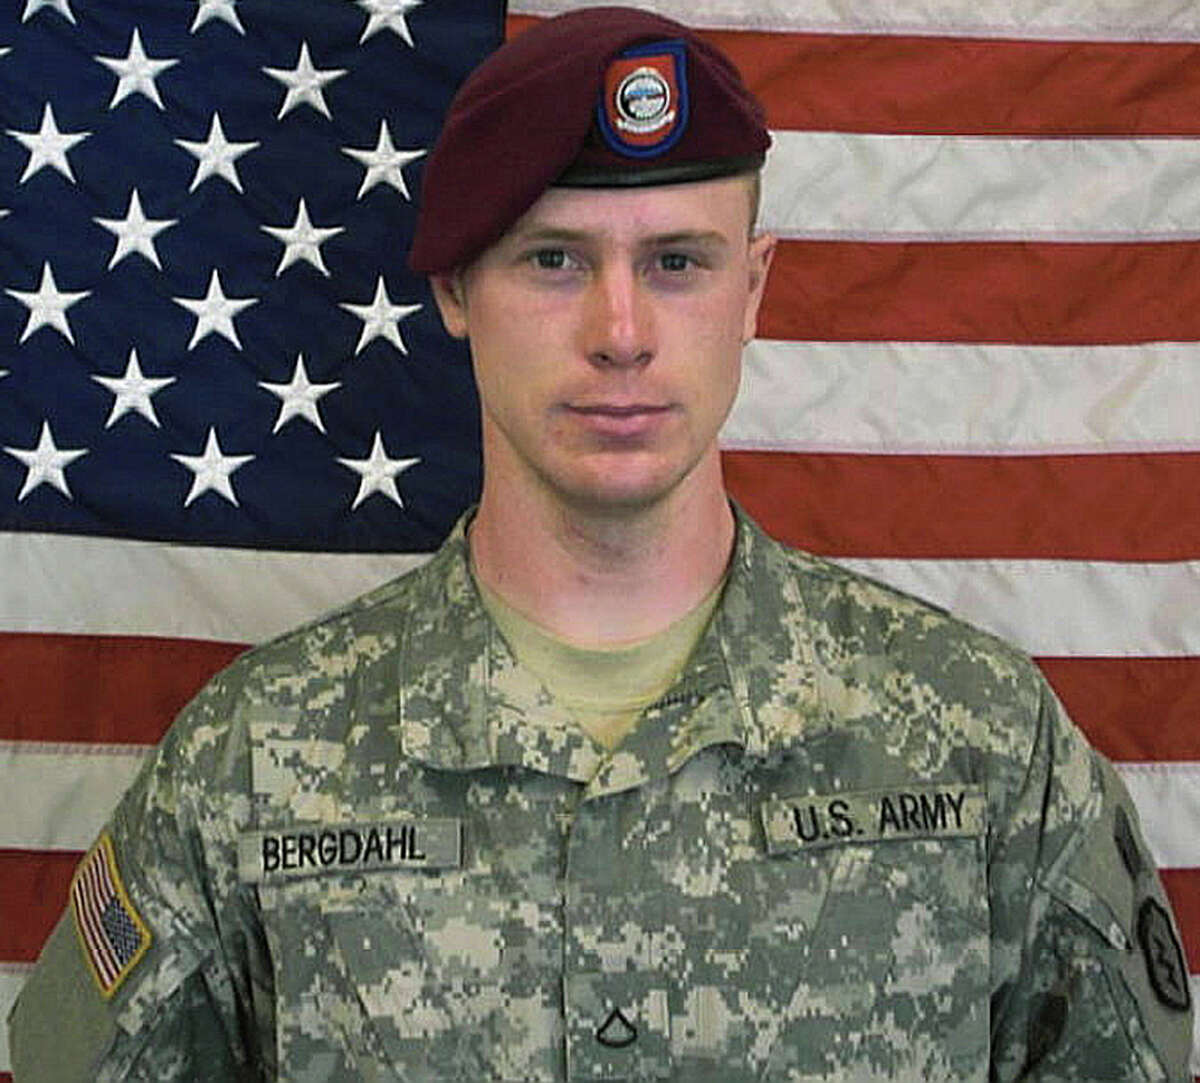 FILE - This undated photo provided by the U.S. Army shows Sgt. Bowe Bergdahl. Bergdahl went missing from his outpost in Afghanistan in June 2009 and was released by the Taliban on May 31, 2014. Bergdahl went missing from his outpost in Afghanistan in June 2009 and was released from Taliban captivity on May 31, 2014 in exchange for five enemy combatants held in the U.S. prison in Guantanamo Bay, Cuba. (AP Photo/U.S. Army)